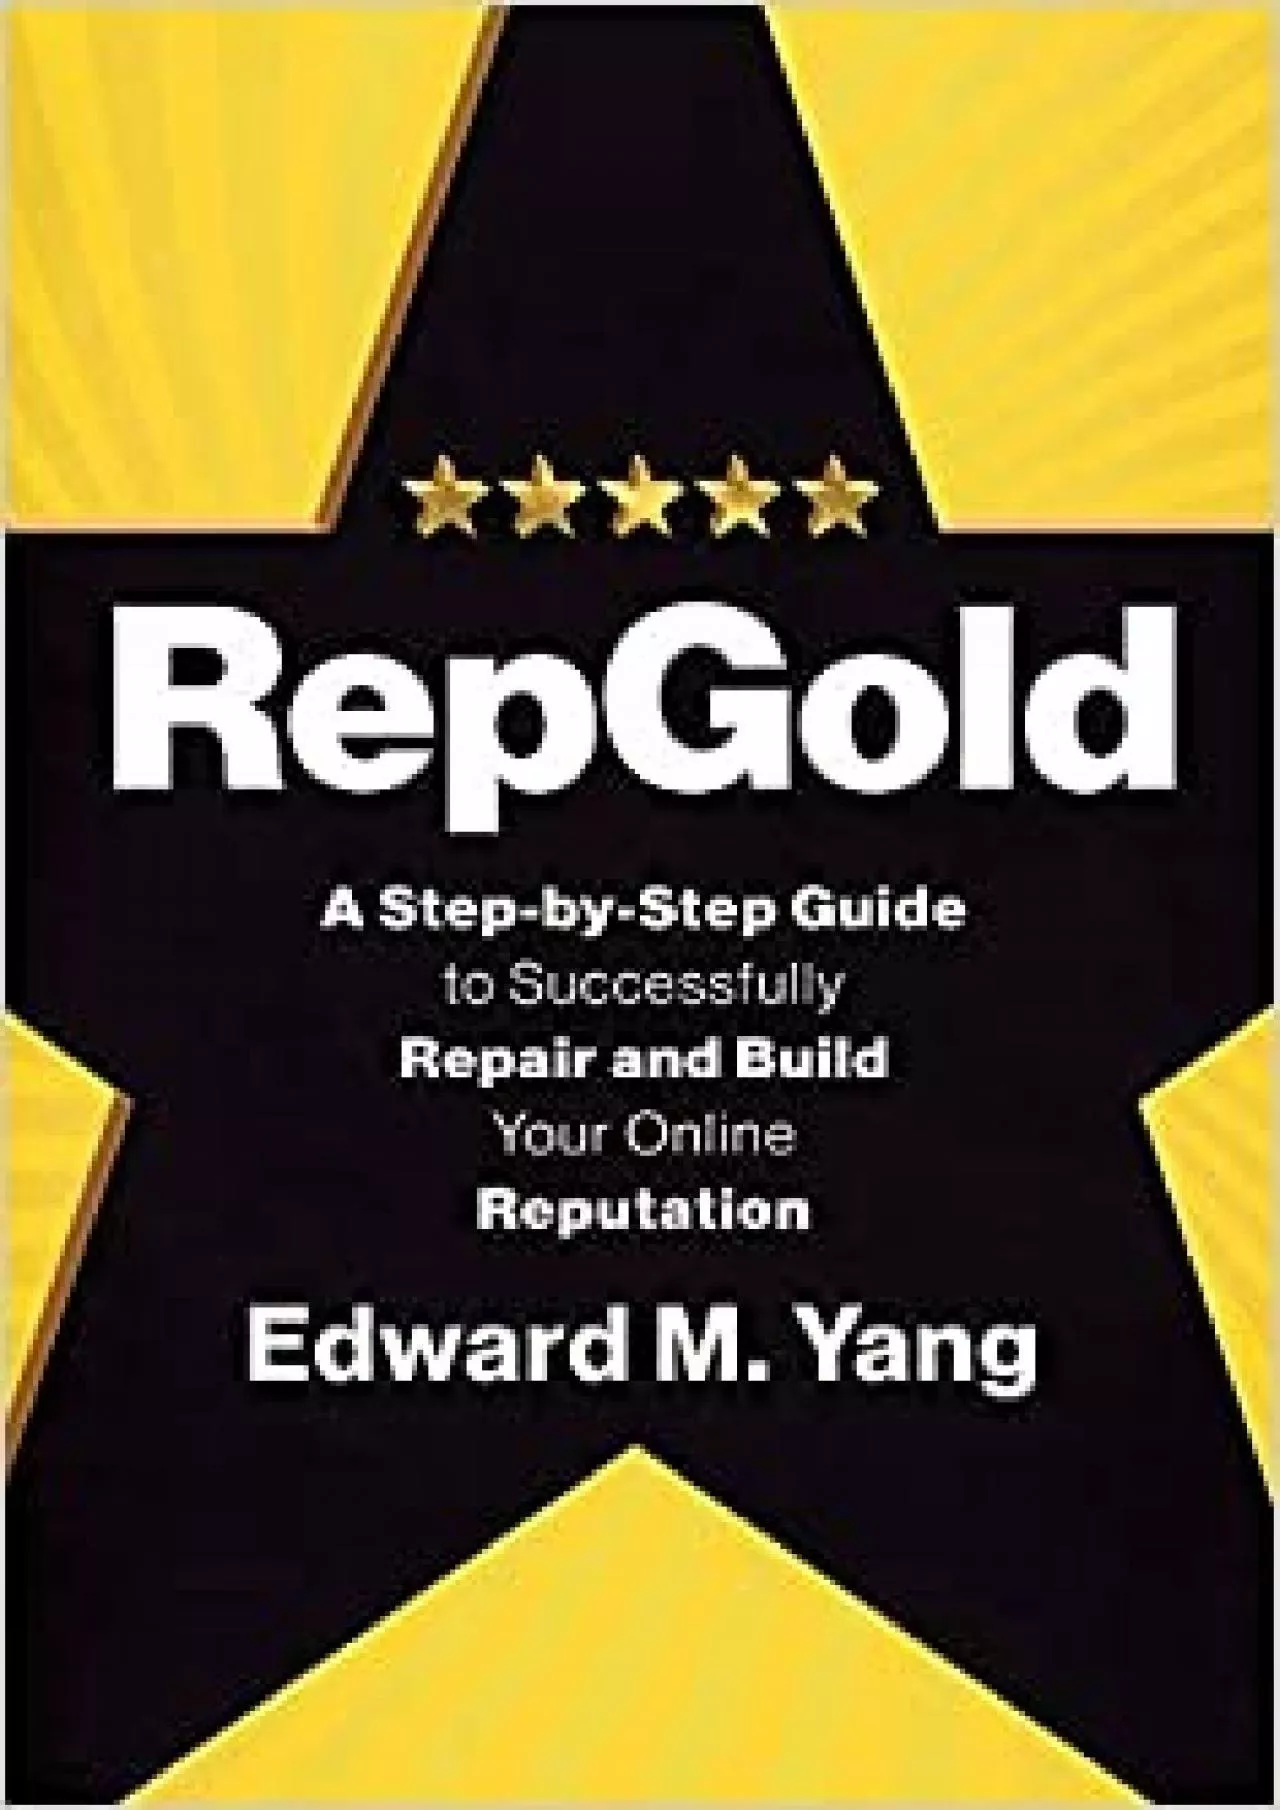 RepGold A Step-by-Step Guide to Successfully Repair and Build Your Online Reputation